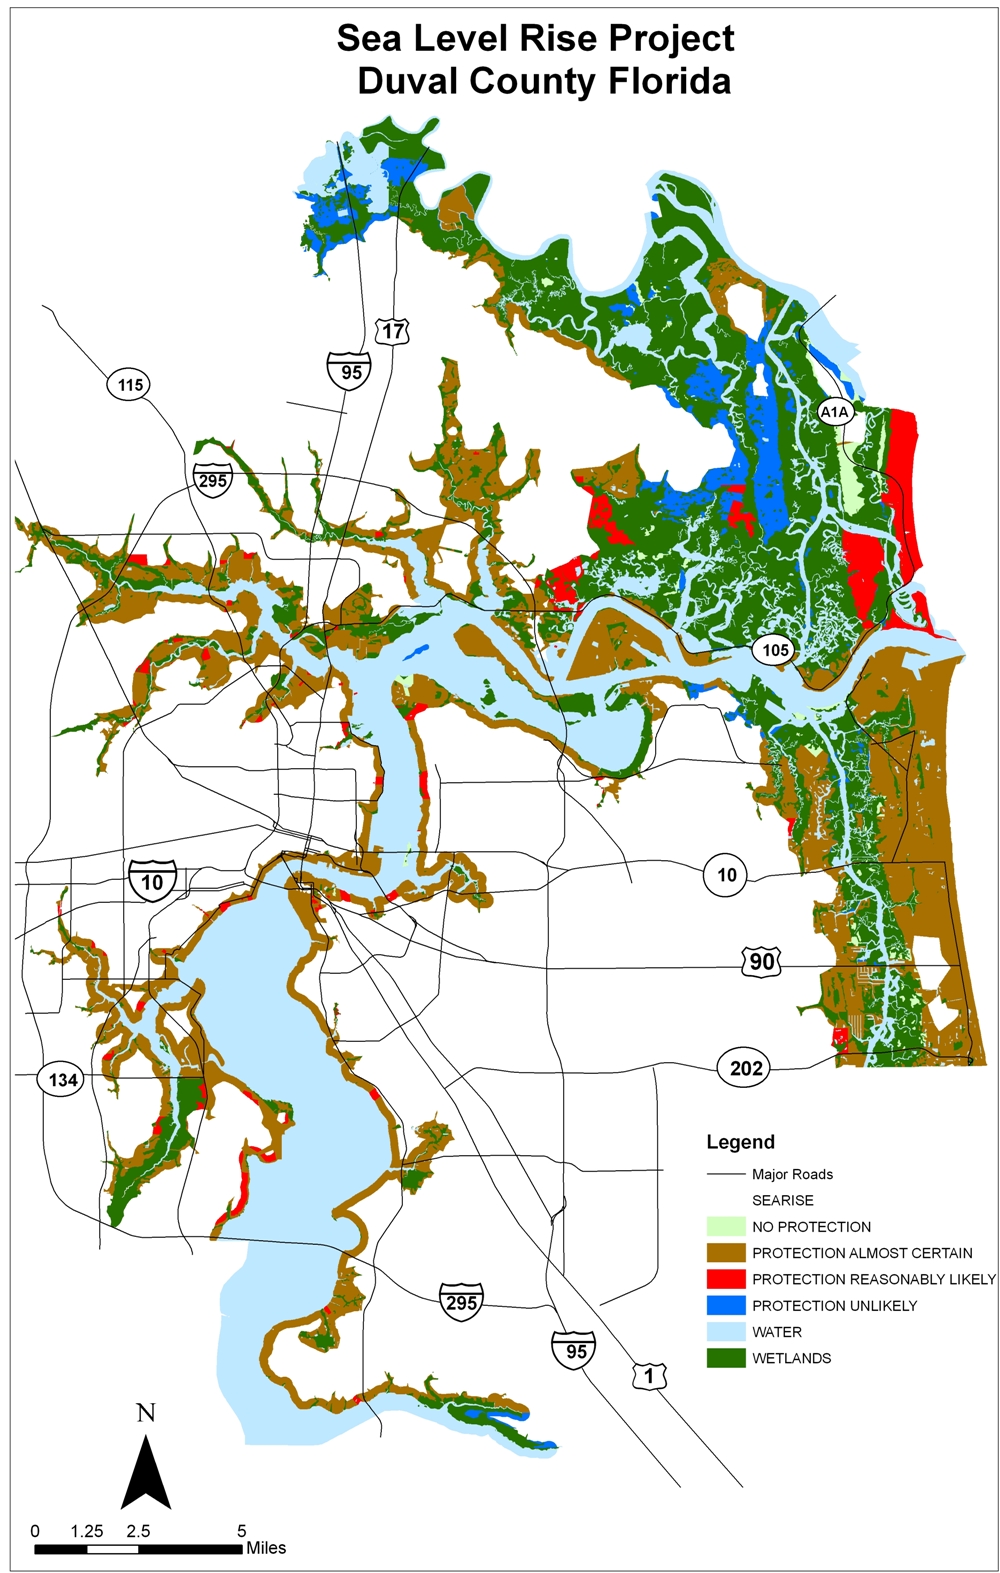 Duval County, Florida sea level rise planning map